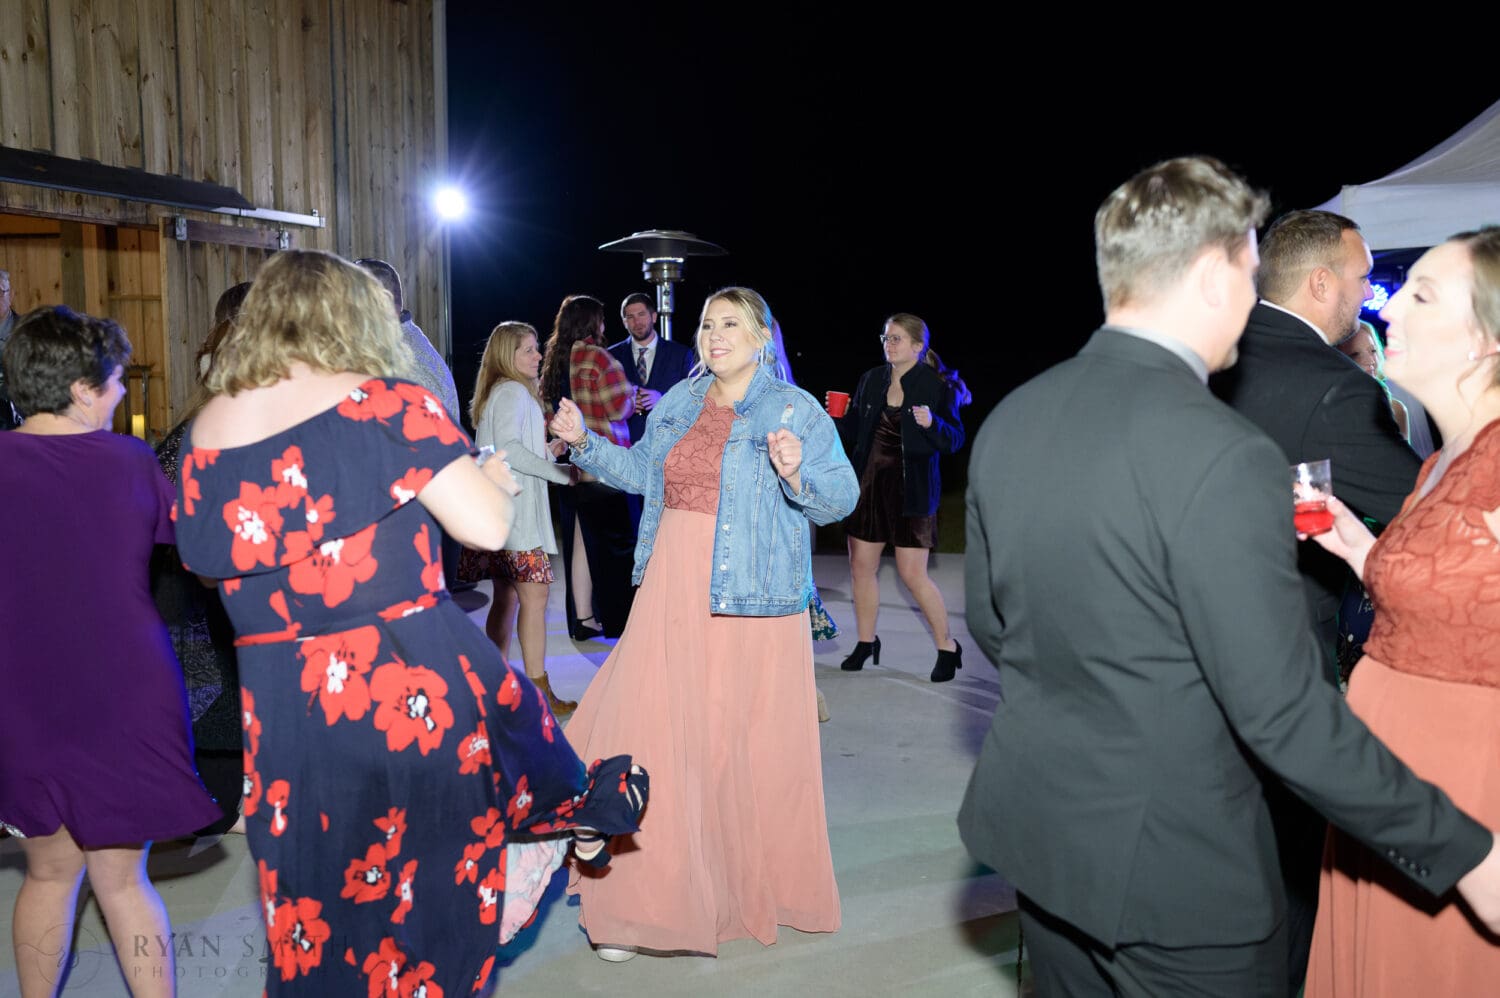 Fun dancing during the reception - The Blessed Barn